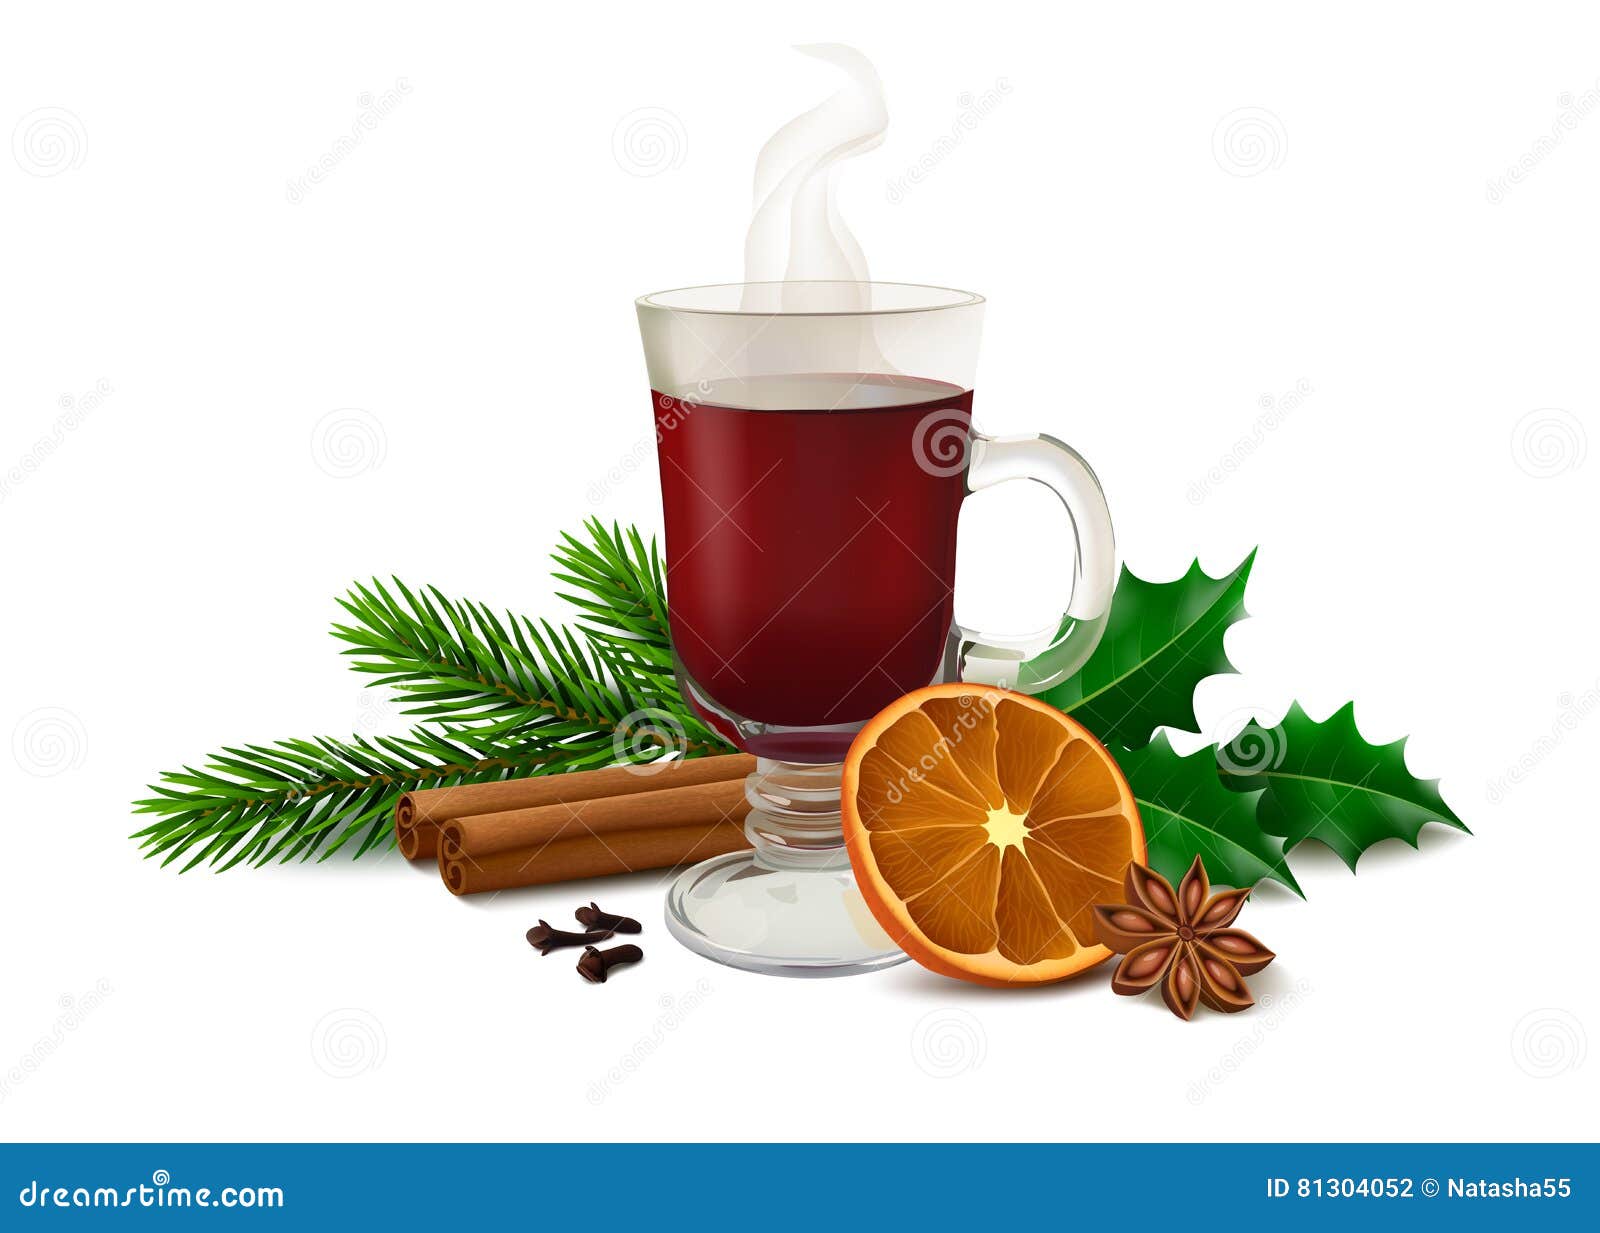 Realistic mulled wine glass orange anise Vector Image